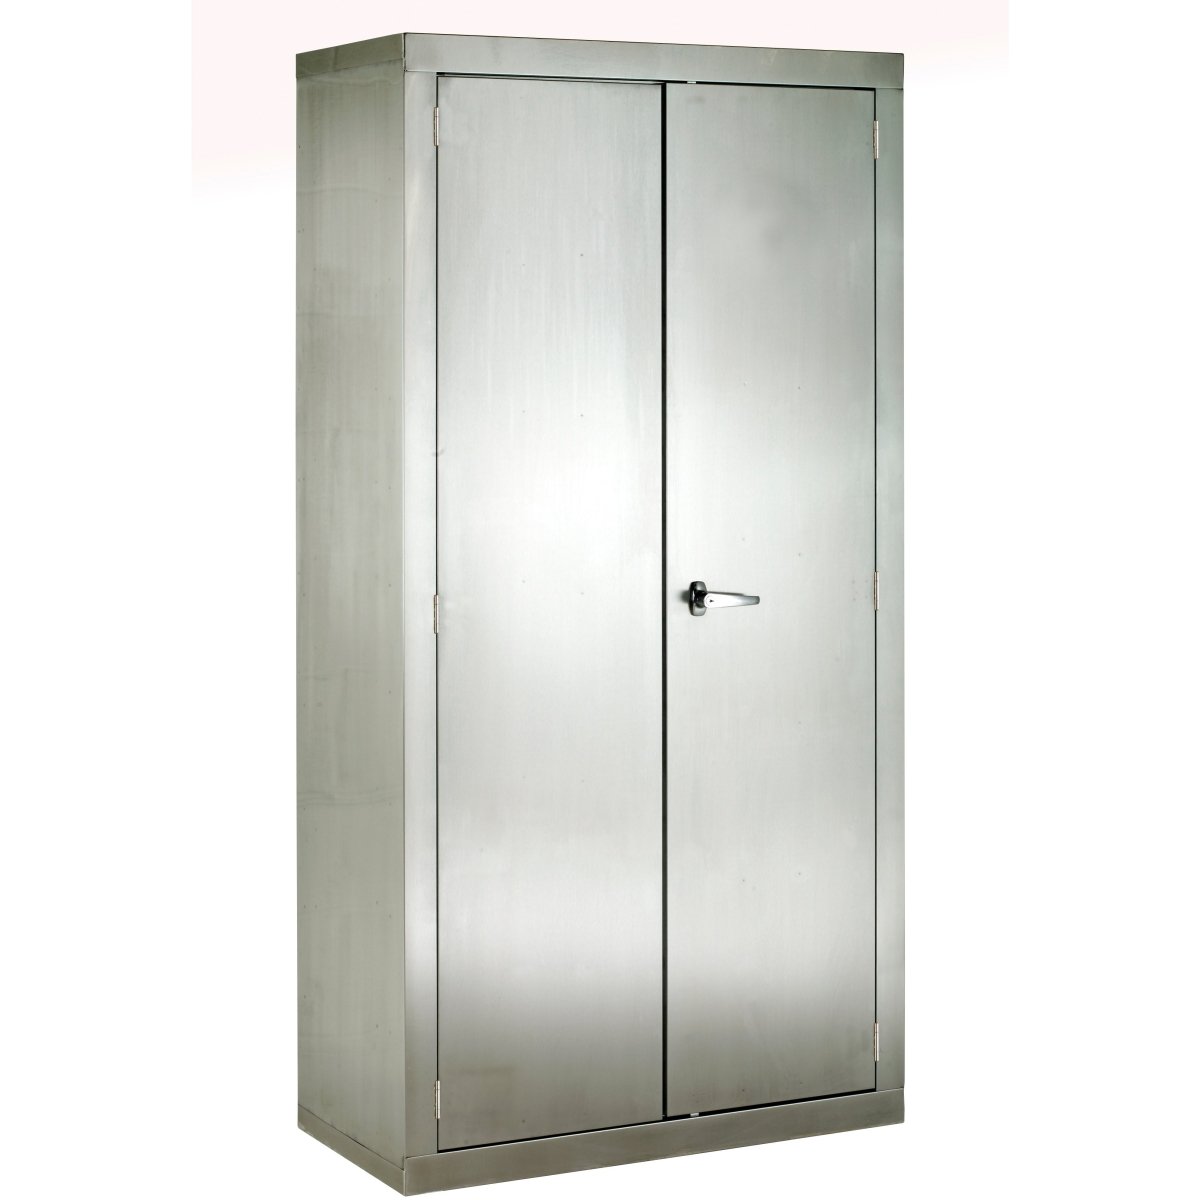 Heavy Duty Stainless Steel Cabinets With Shelves (4 Models) - Warehouse Storage Products